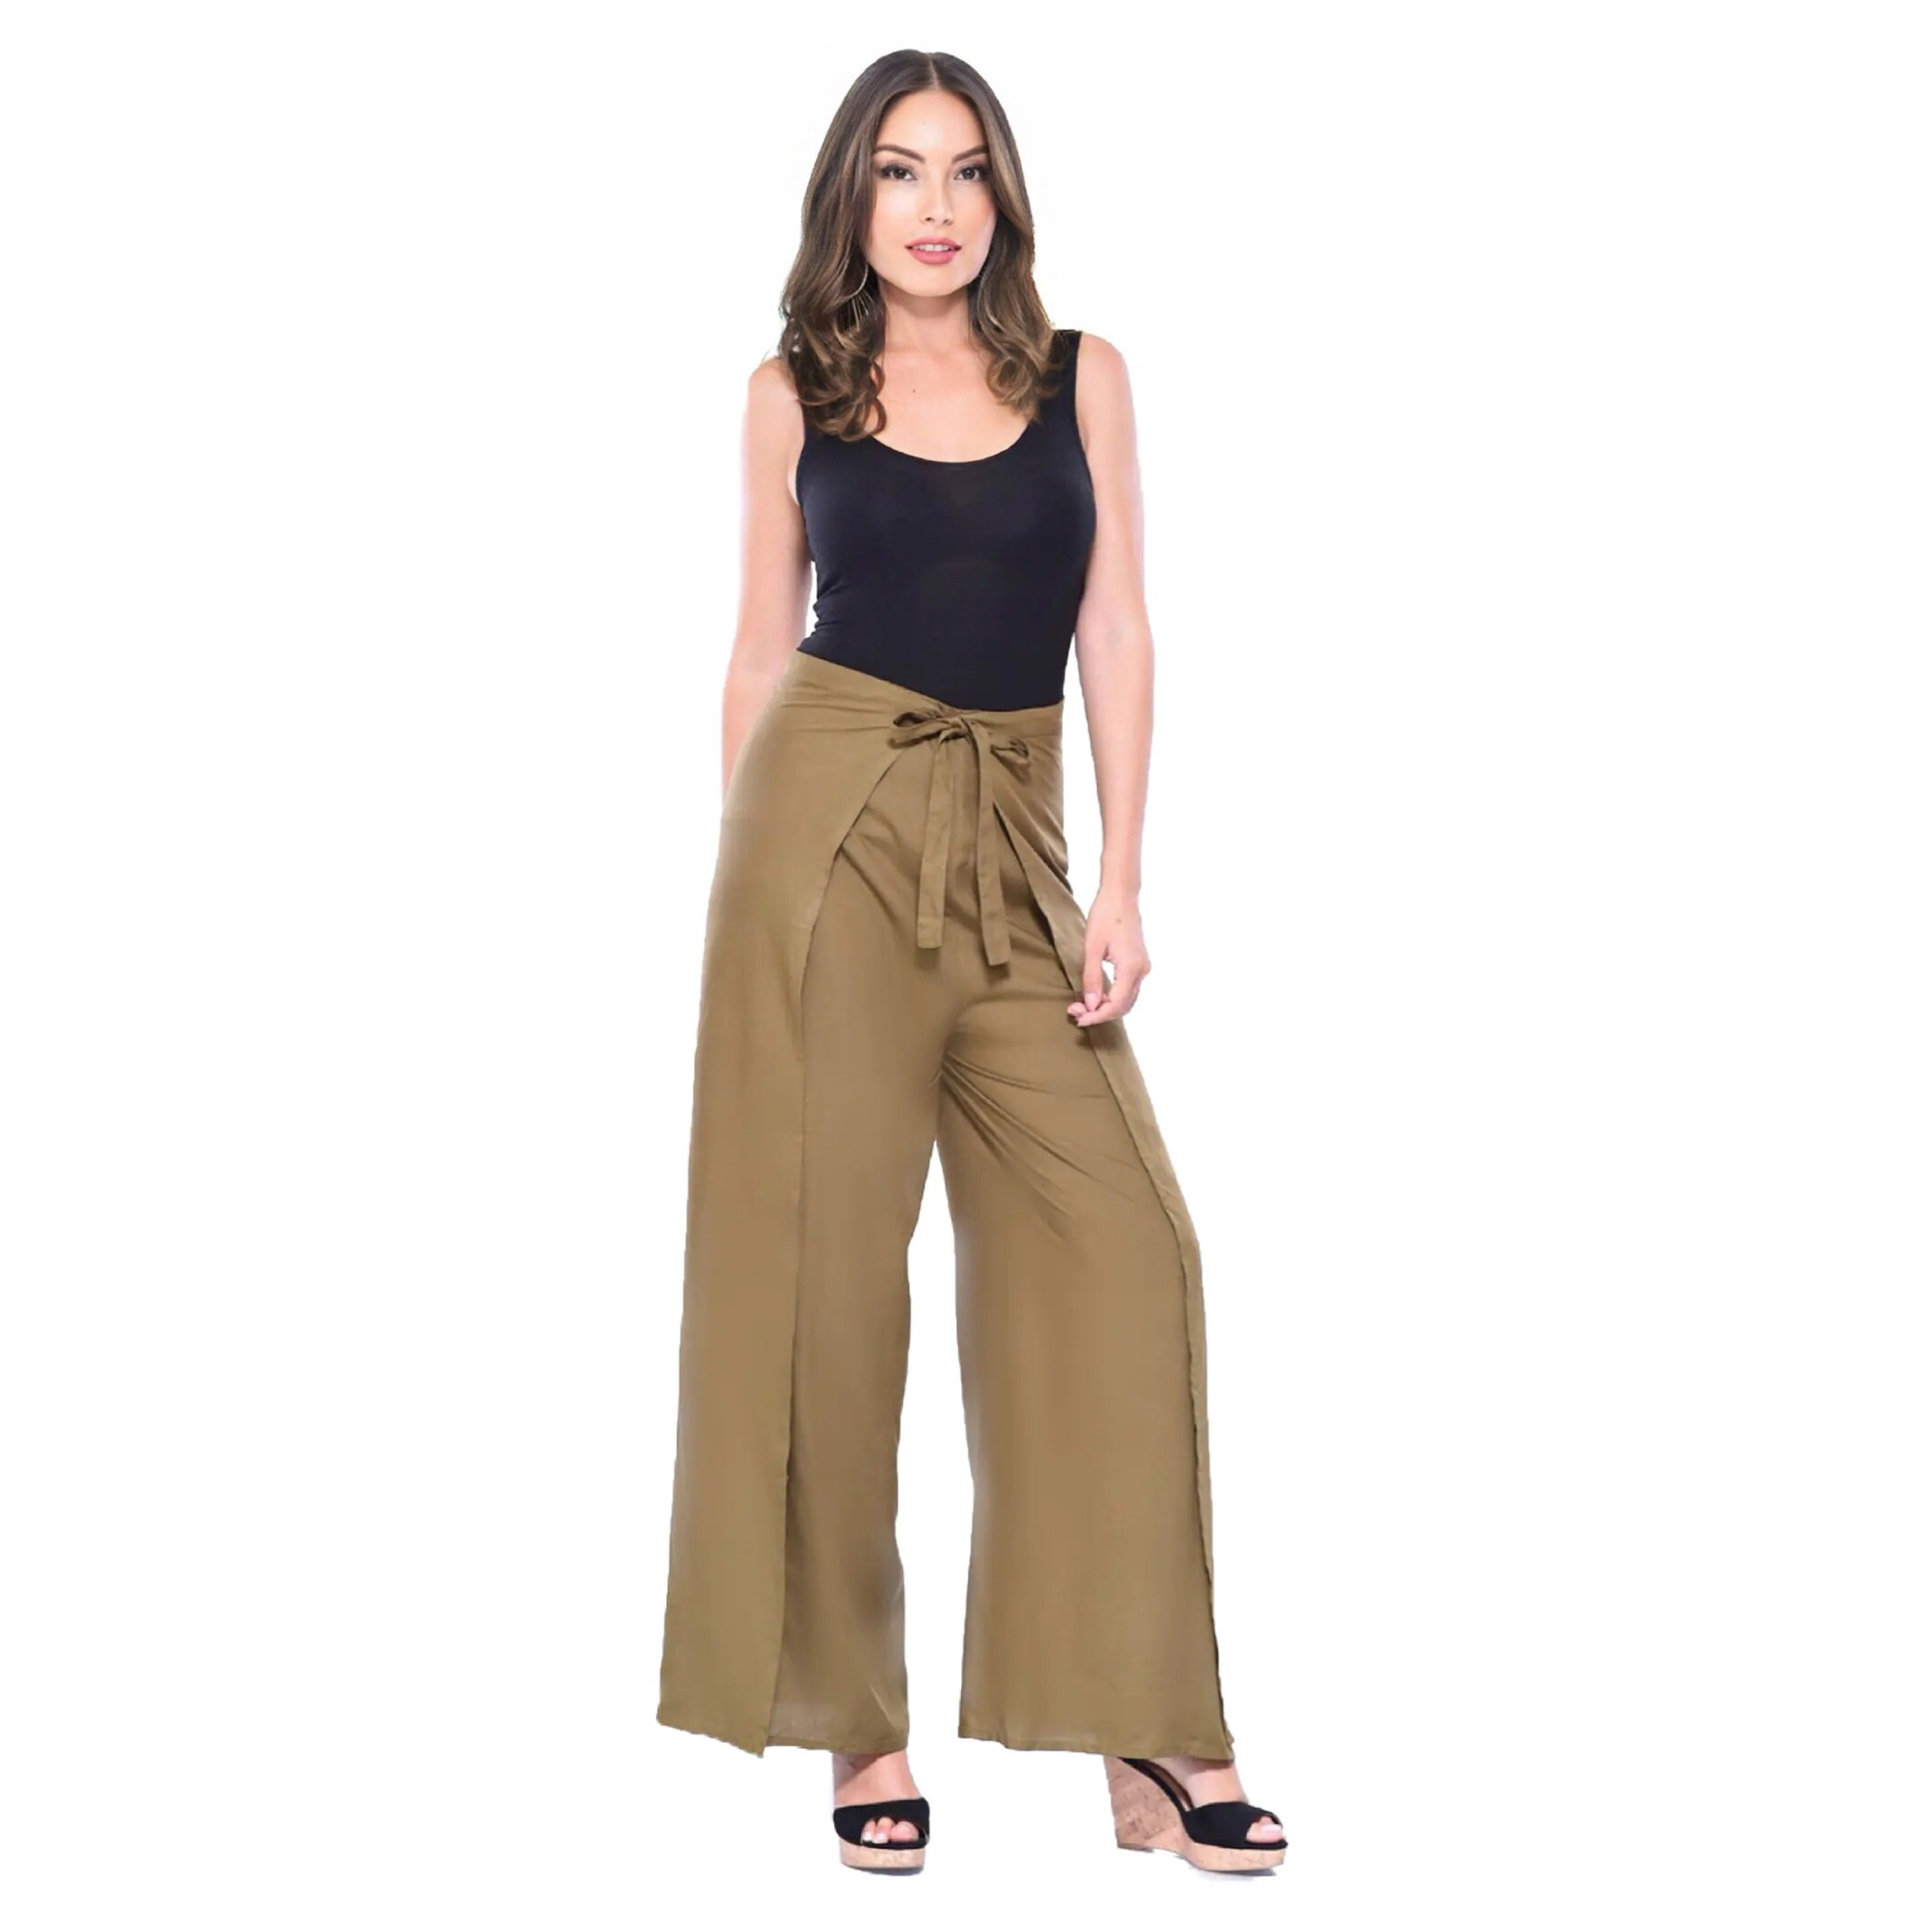 Solid Color Wrap Pants, Lightweight and Flowy Wrap Around Pants, Soft  Fabric Palazzo Pants, Women's Boho Pants Front and Back Ties -  Canada